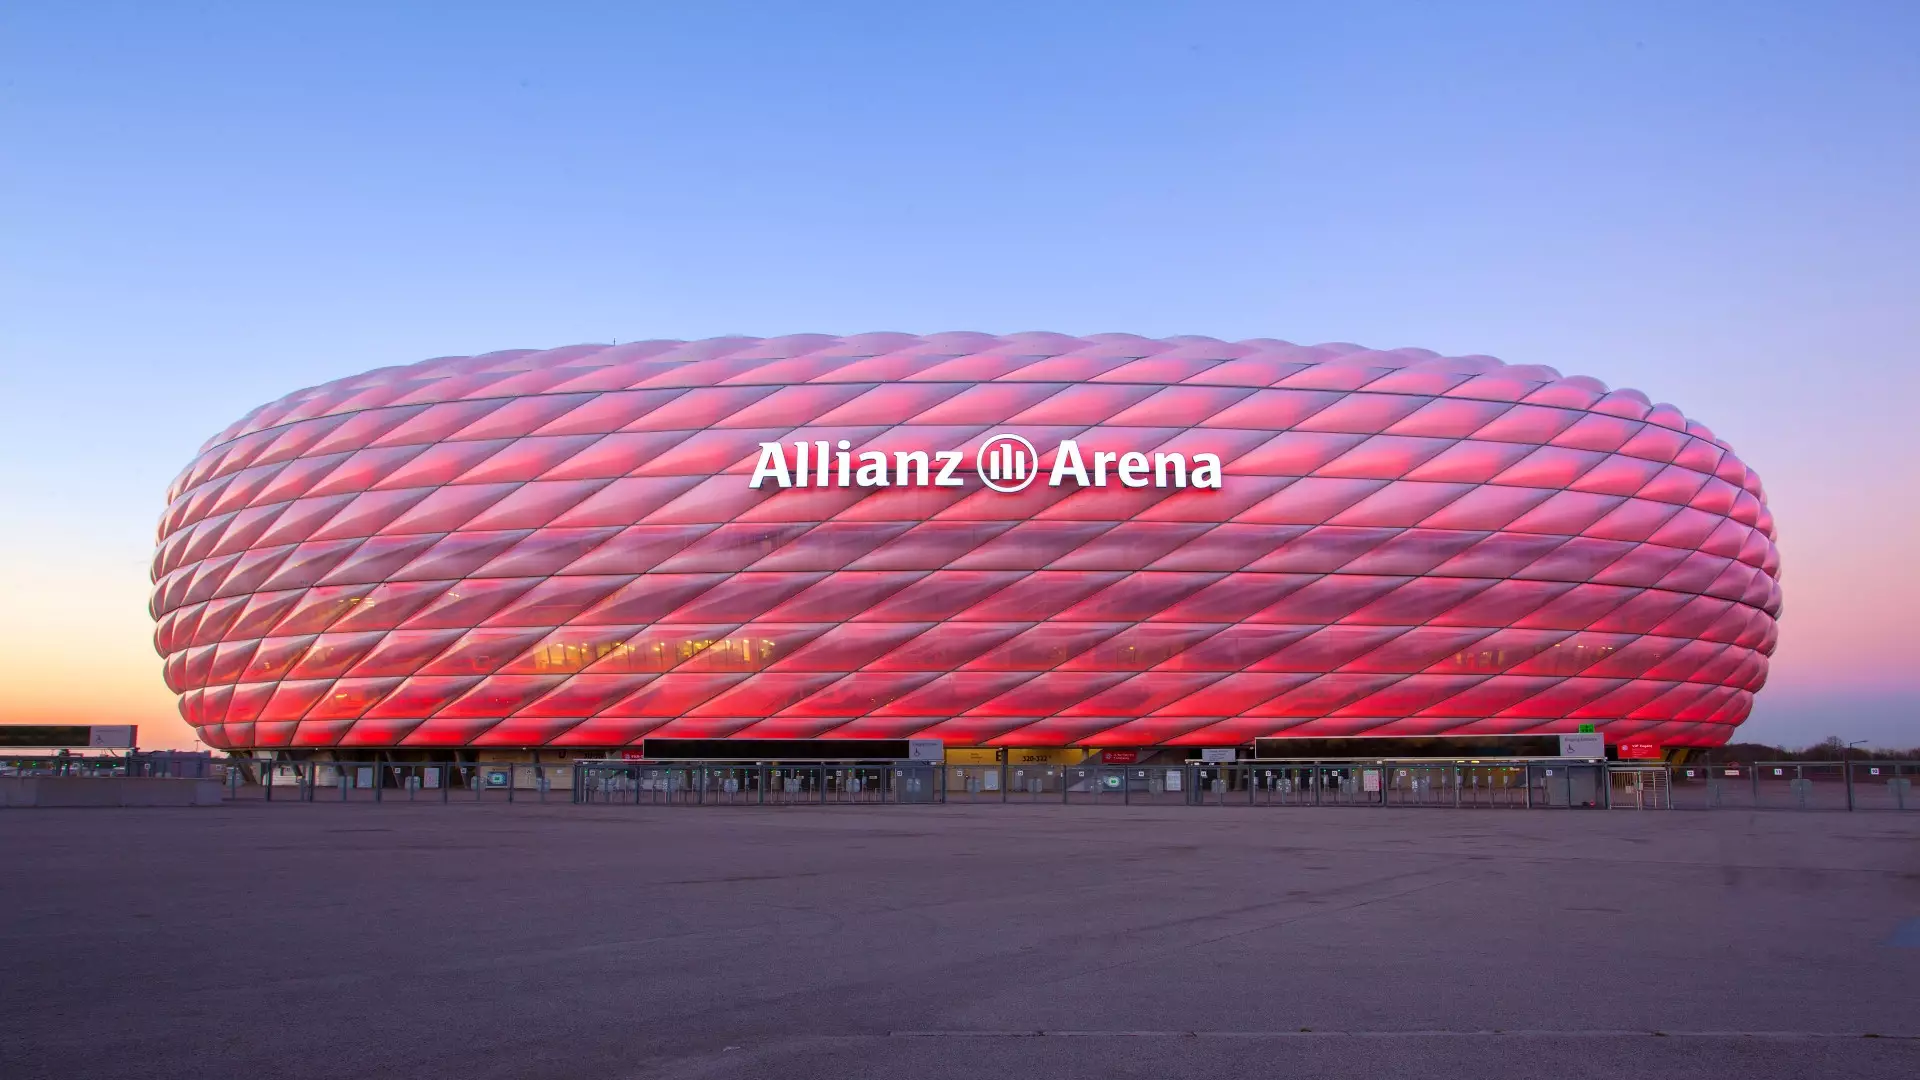 The Allianz arena in all its beauty. Image: Allianz Arena. 